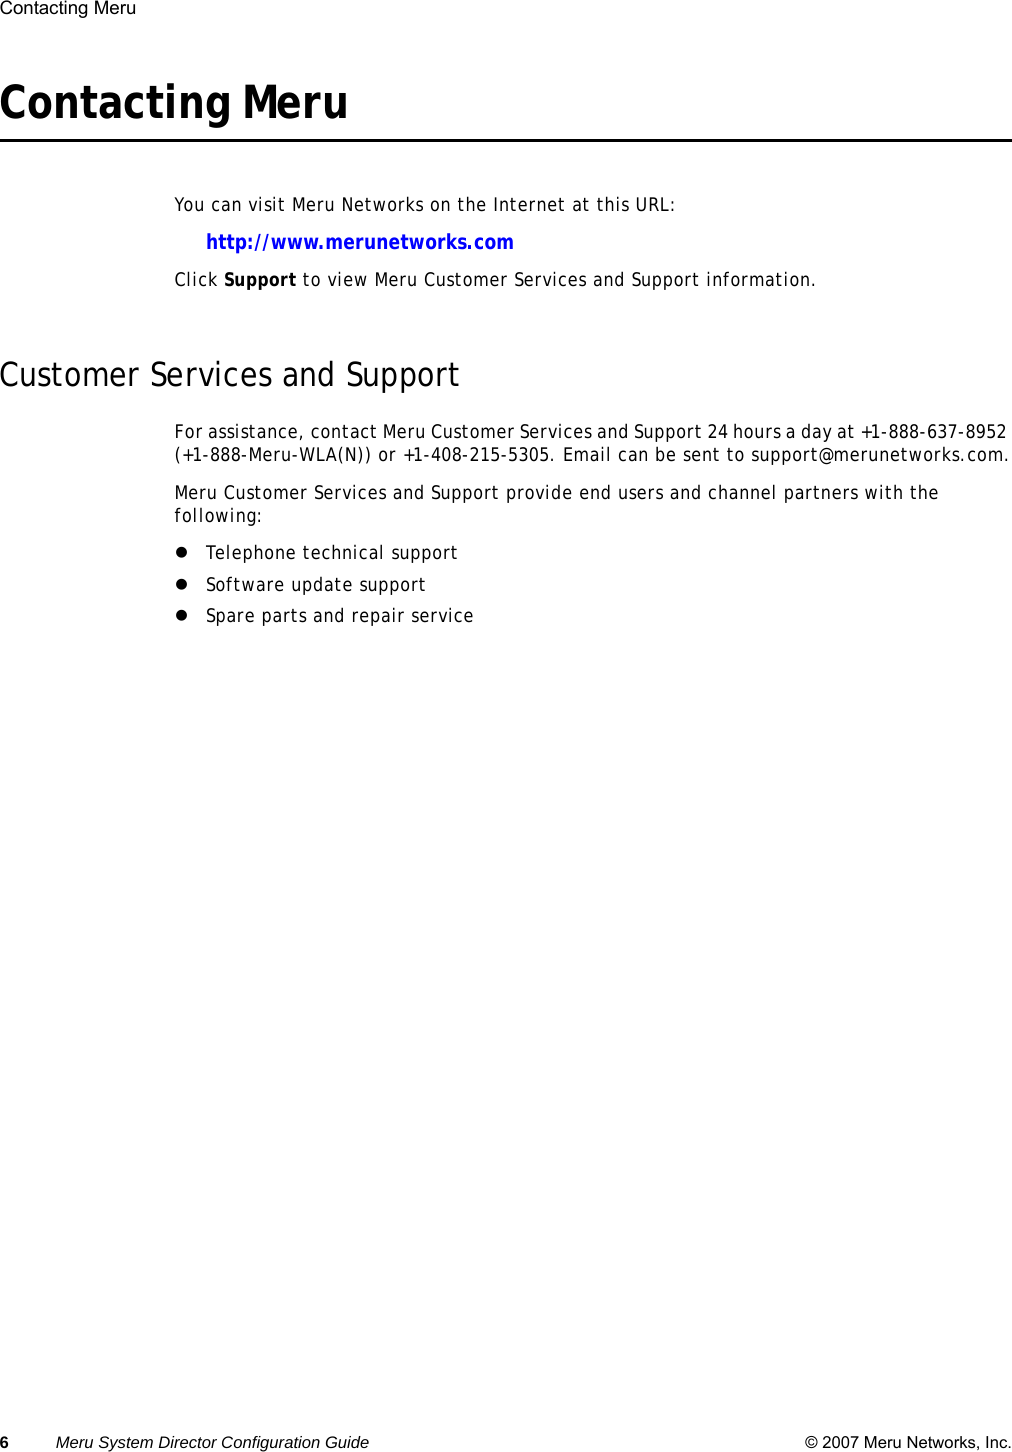 6Meru System Director Configuration Guide © 2007 Meru Networks, Inc.Contacting Meru Contacting Meru You can visit Meru Networks on the Internet at this URL:http://www.merunetworks.comClick Support to view Meru Customer Services and Support information.Customer Services and SupportFor assistance, contact Meru Customer Services and Support 24 hours a day at +1-888-637-8952 (+1-888-Meru-WLA(N)) or +1-408-215-5305. Email can be sent to support@merunetworks.com.Meru Customer Services and Support provide end users and channel partners with the following:zTelephone technical supportzSoftware update supportzSpare parts and repair service